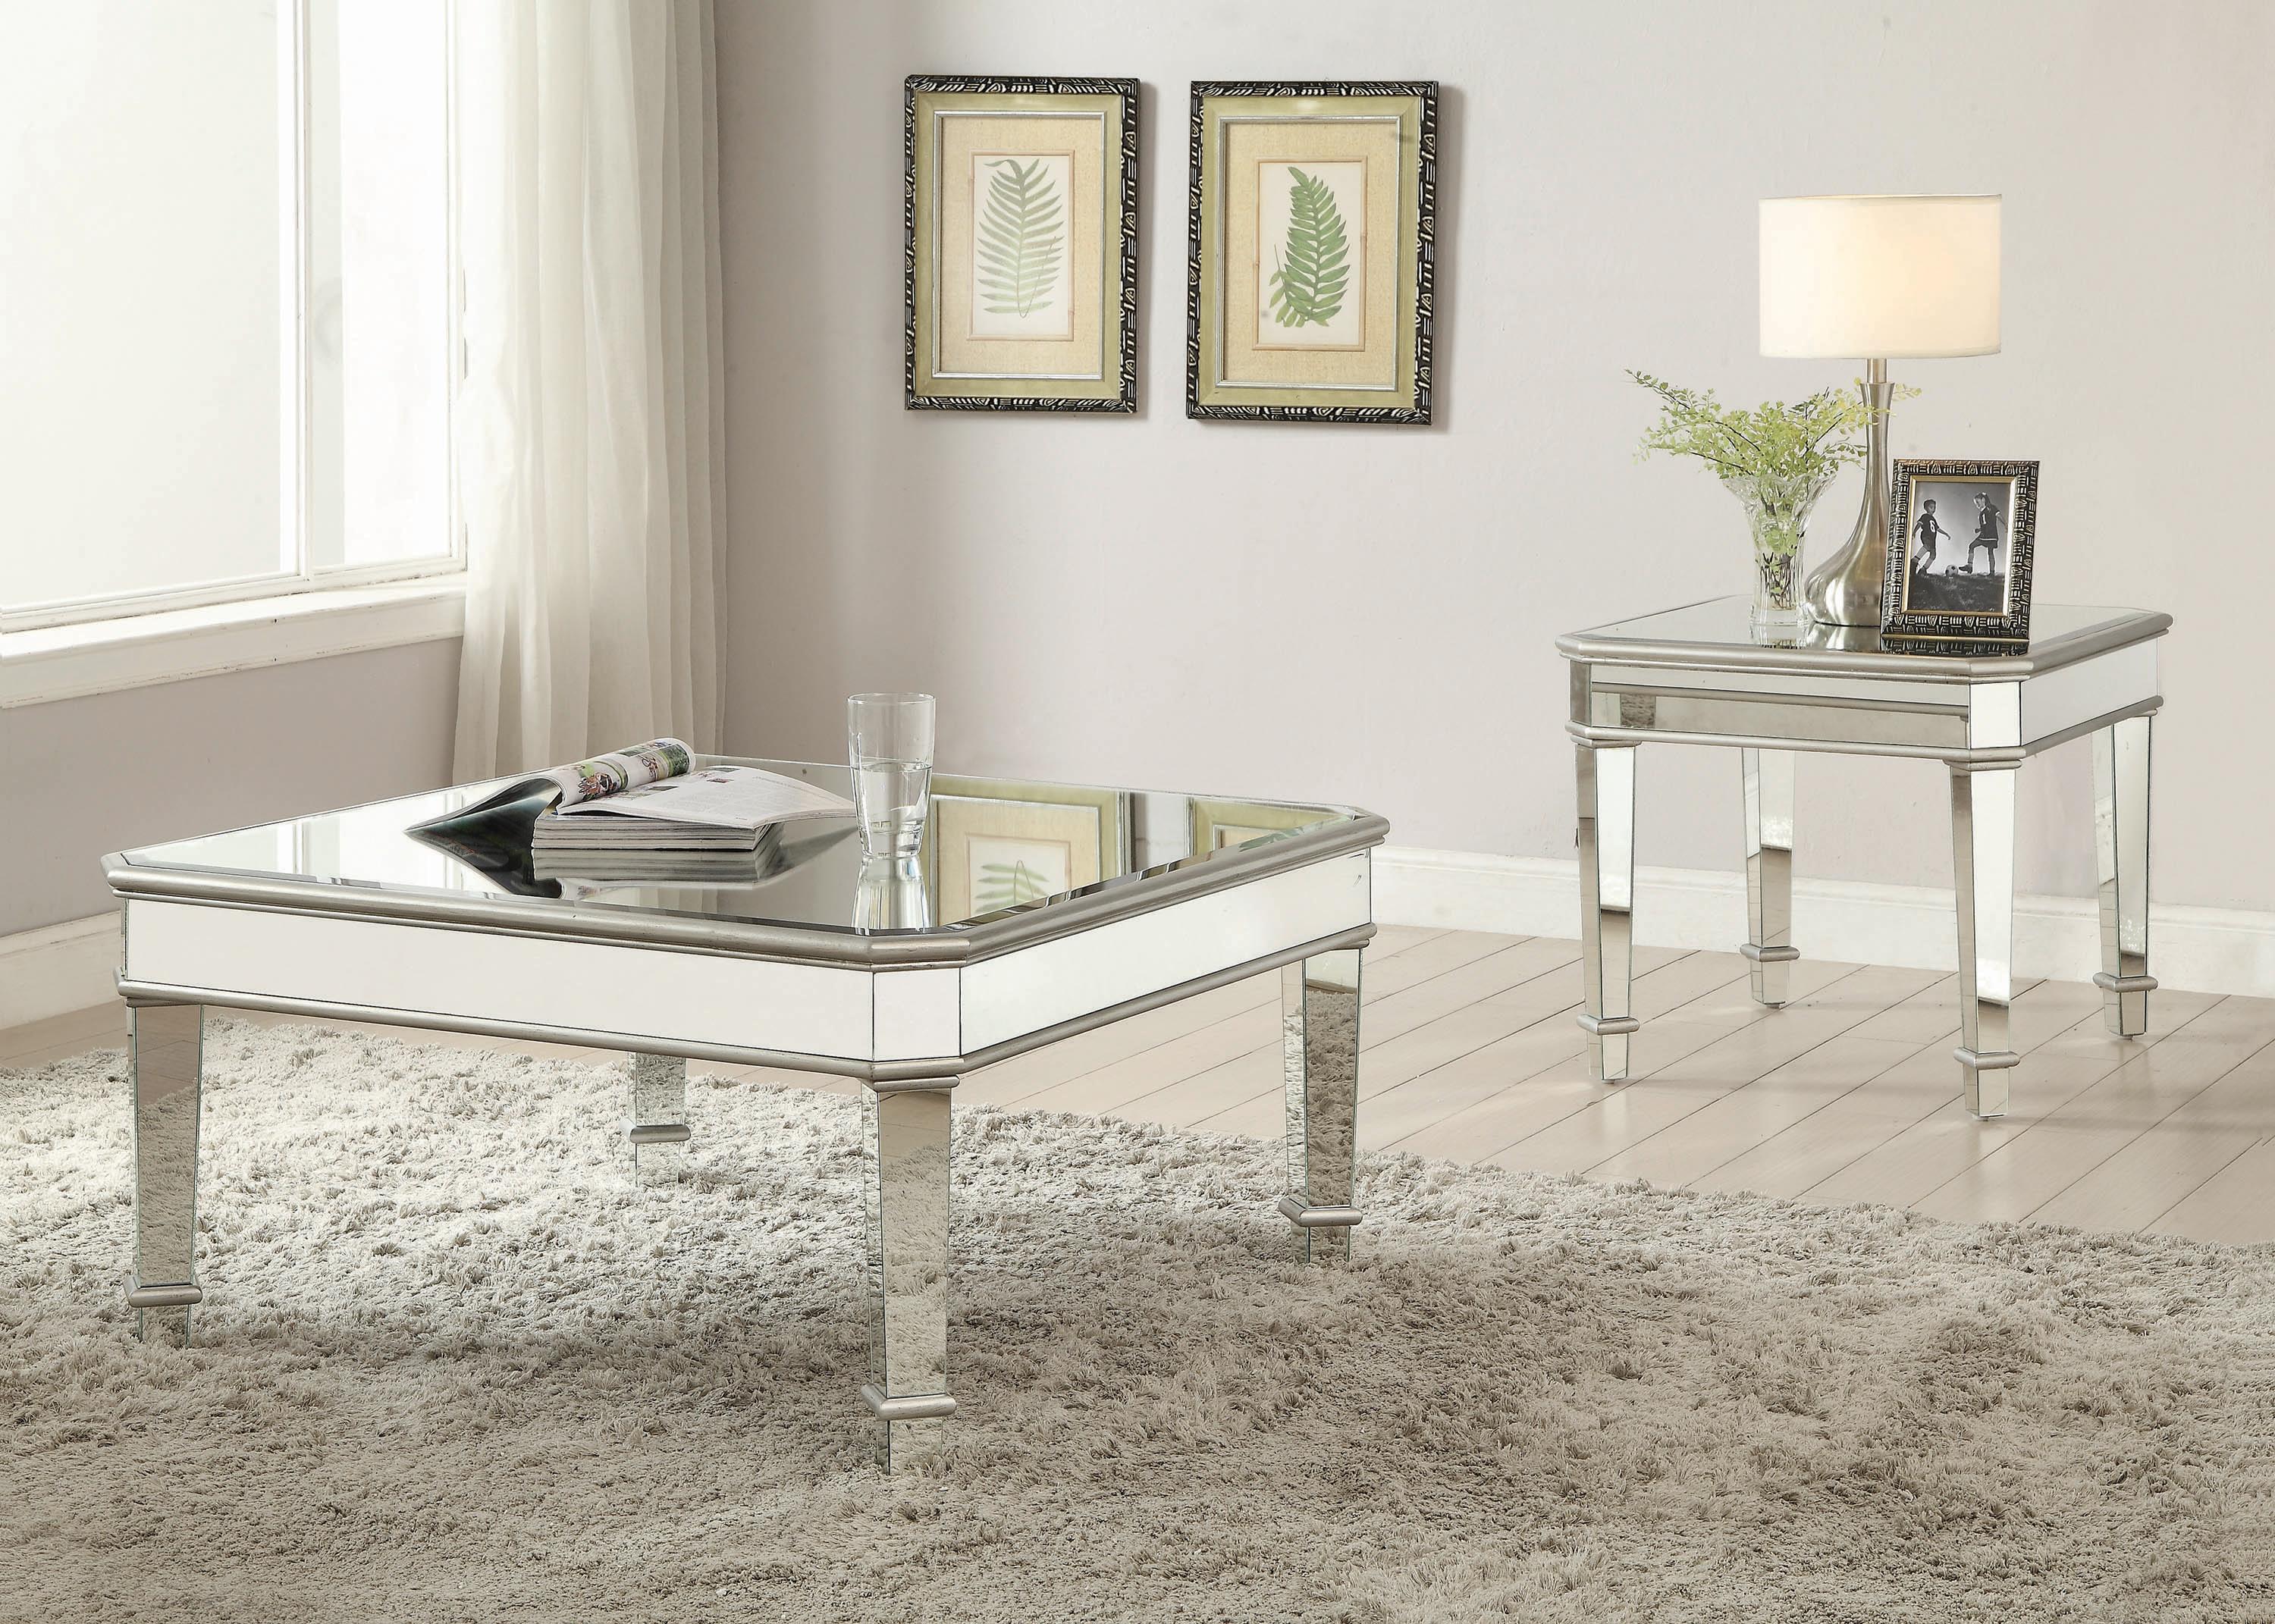 Contemporary Coffee Table Set 703938-S2 Cassandra 703938-S2 in Silver 